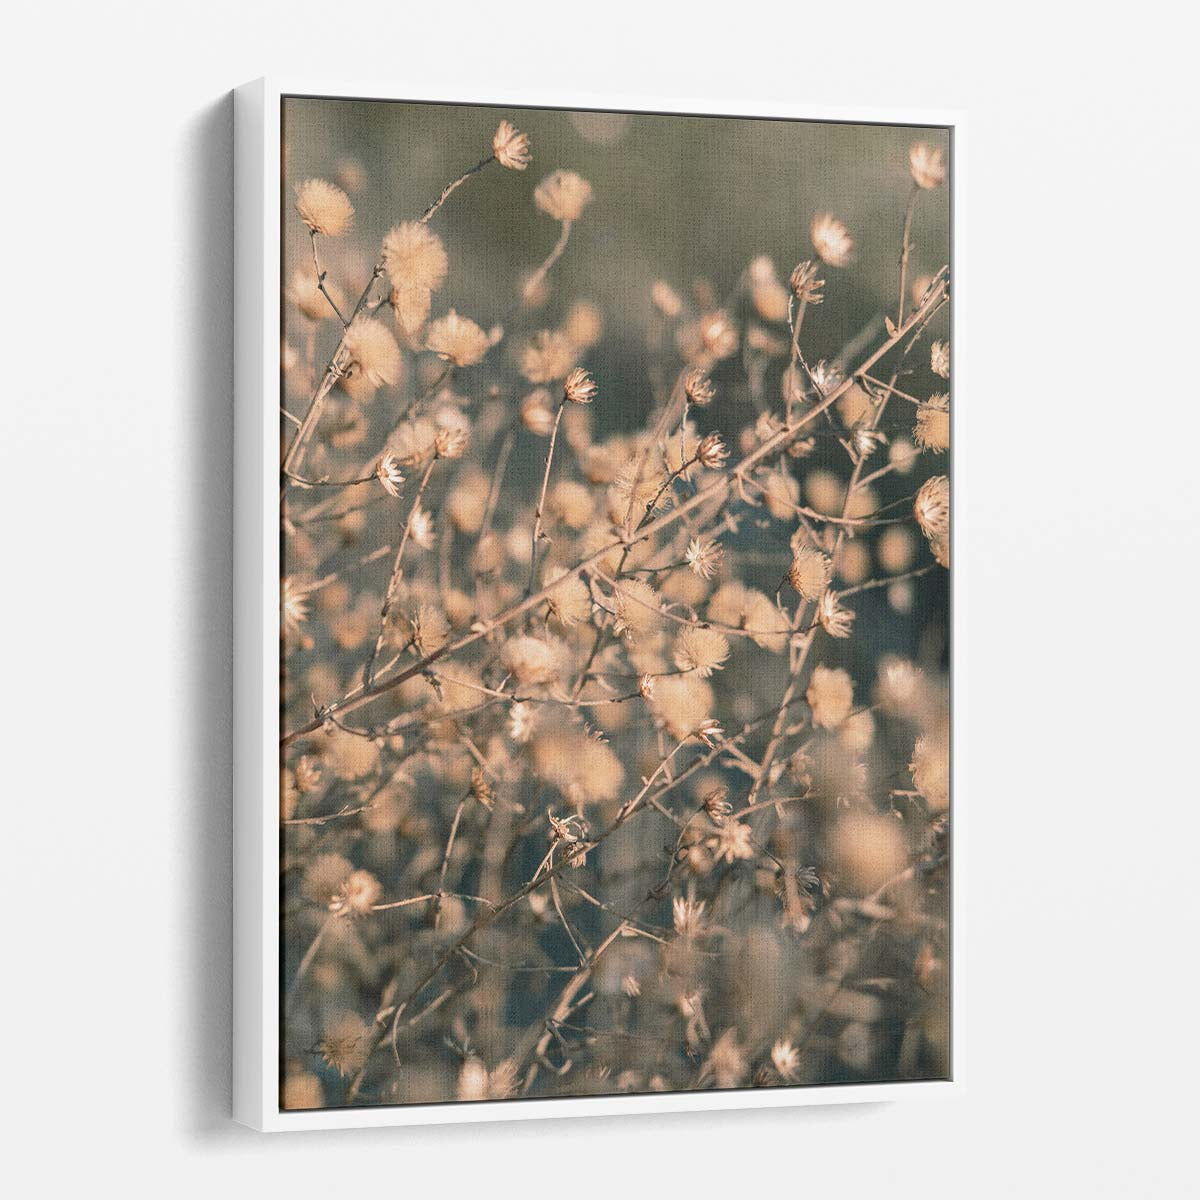 Beige Macro Floral Botanical Photography, Close-Up Bokeh Art by Luxuriance Designs, made in USA